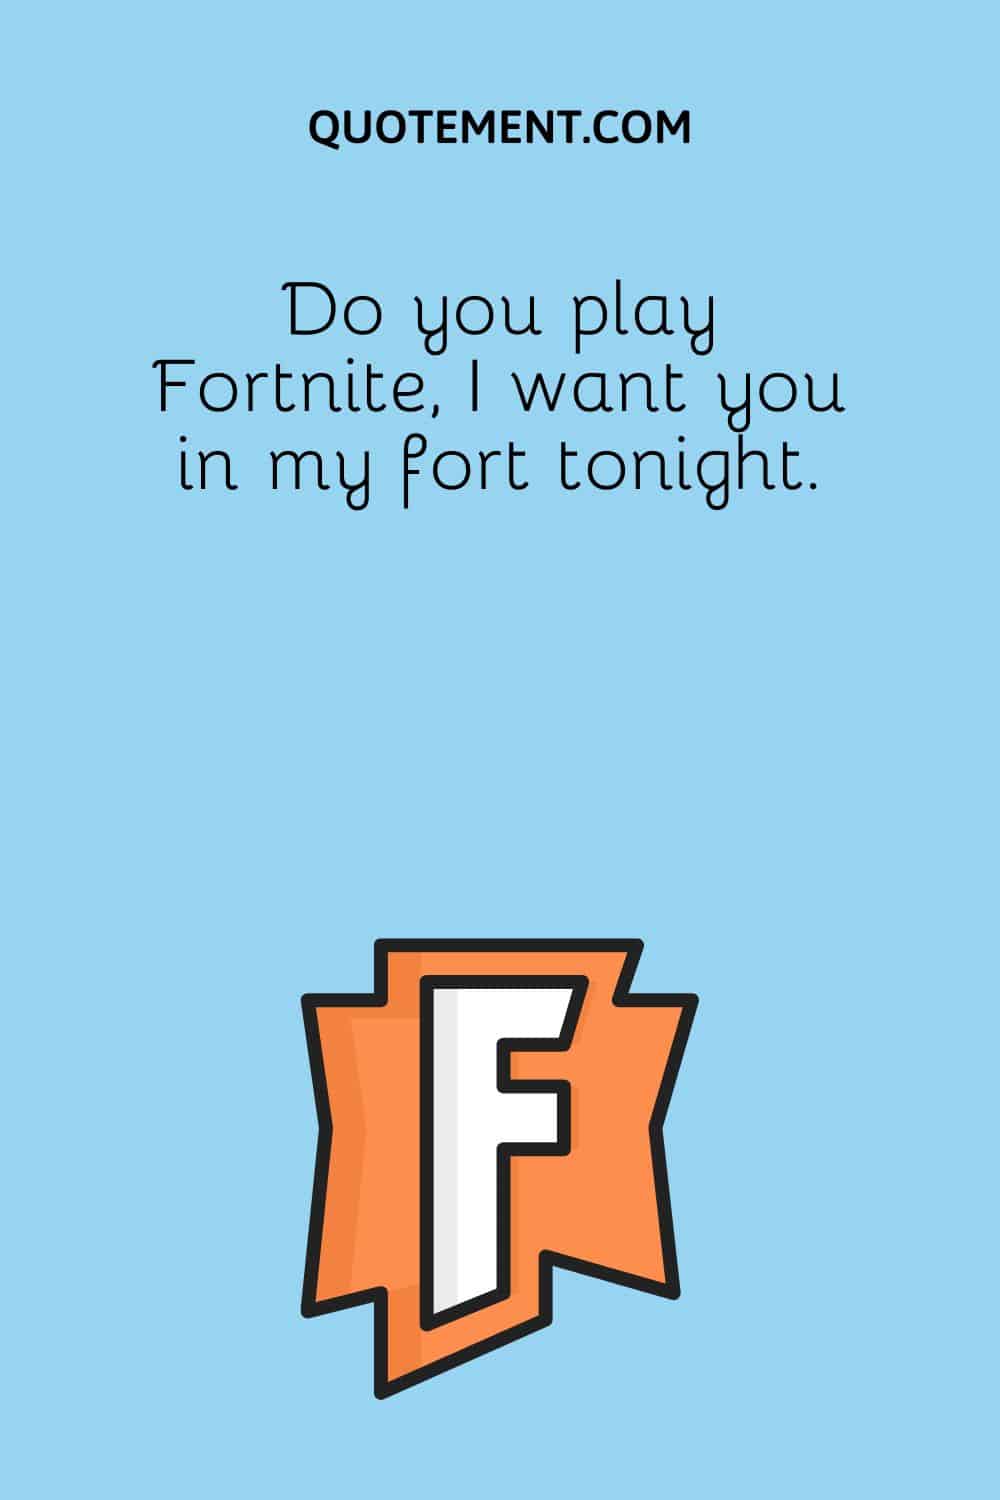 Do you play Fortnite, I want you in my fort tonight.